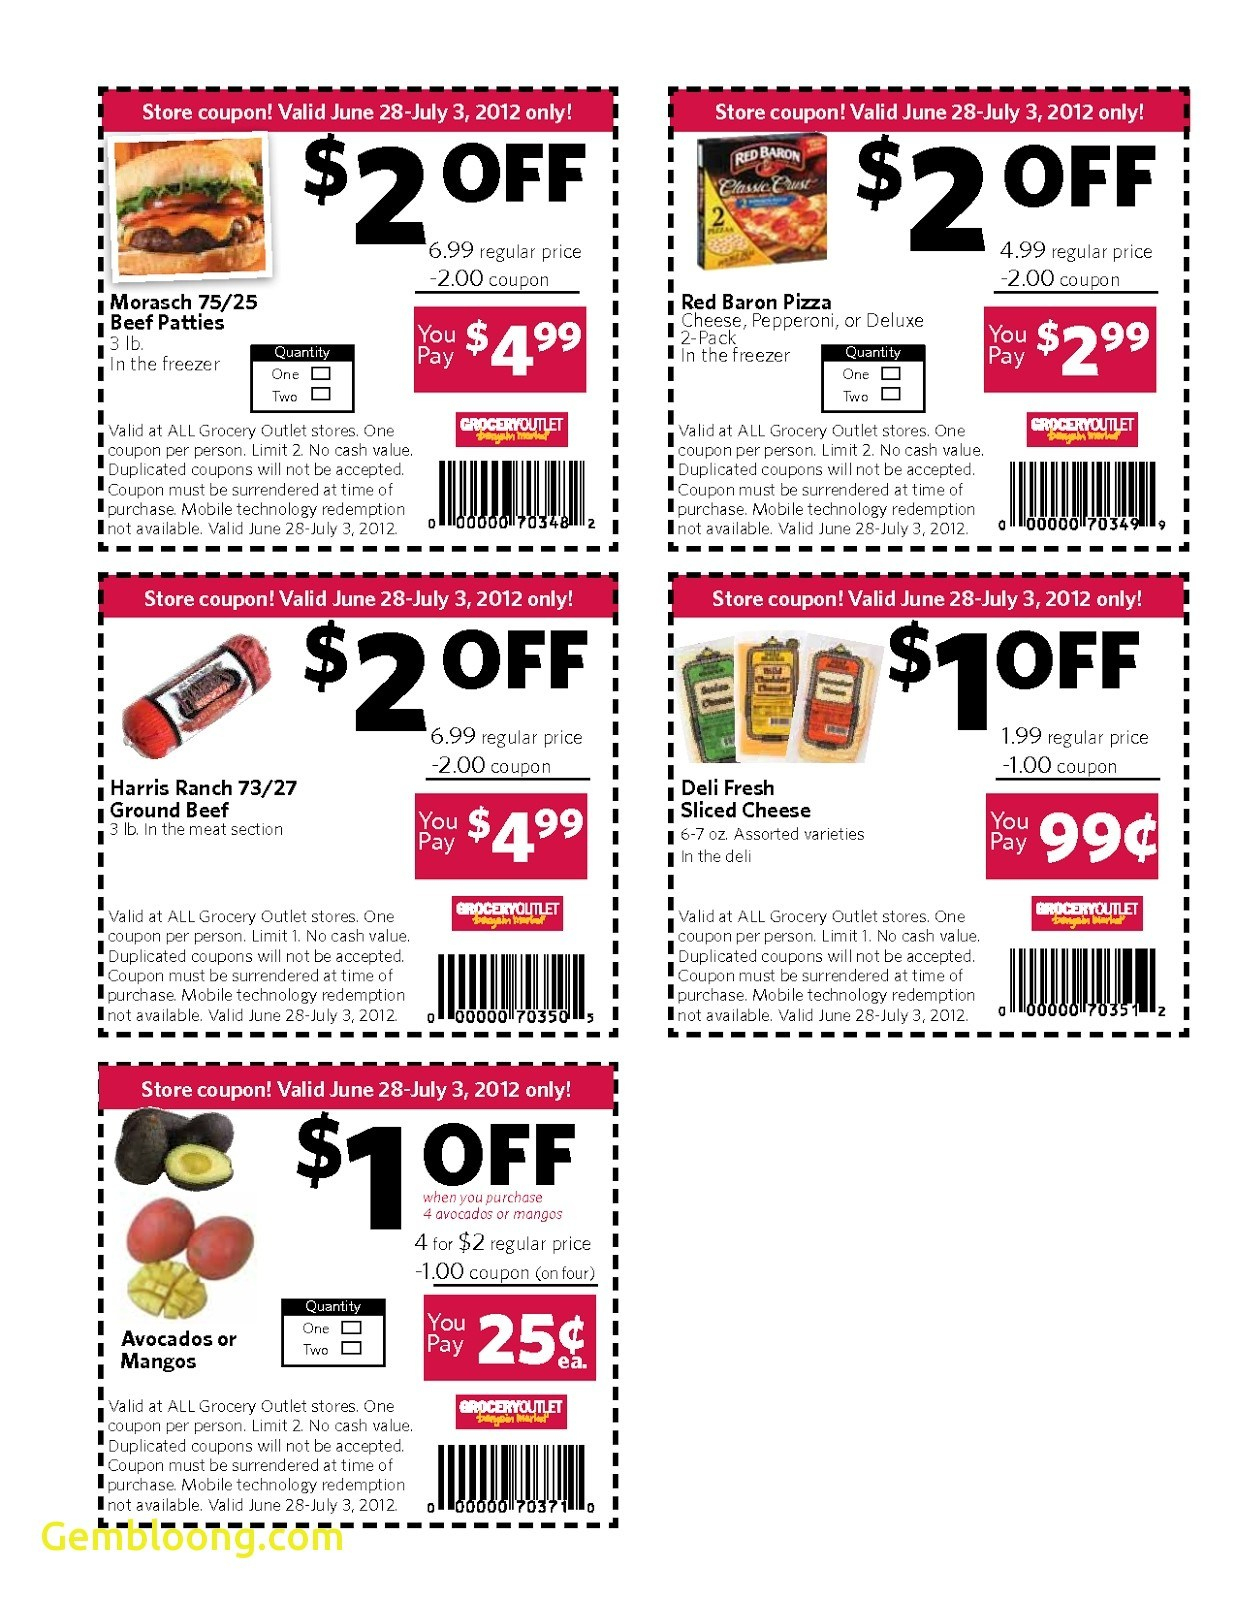 Manufacturers Coupons 2018 Printable Grocery - Free Printable Grocery Coupons